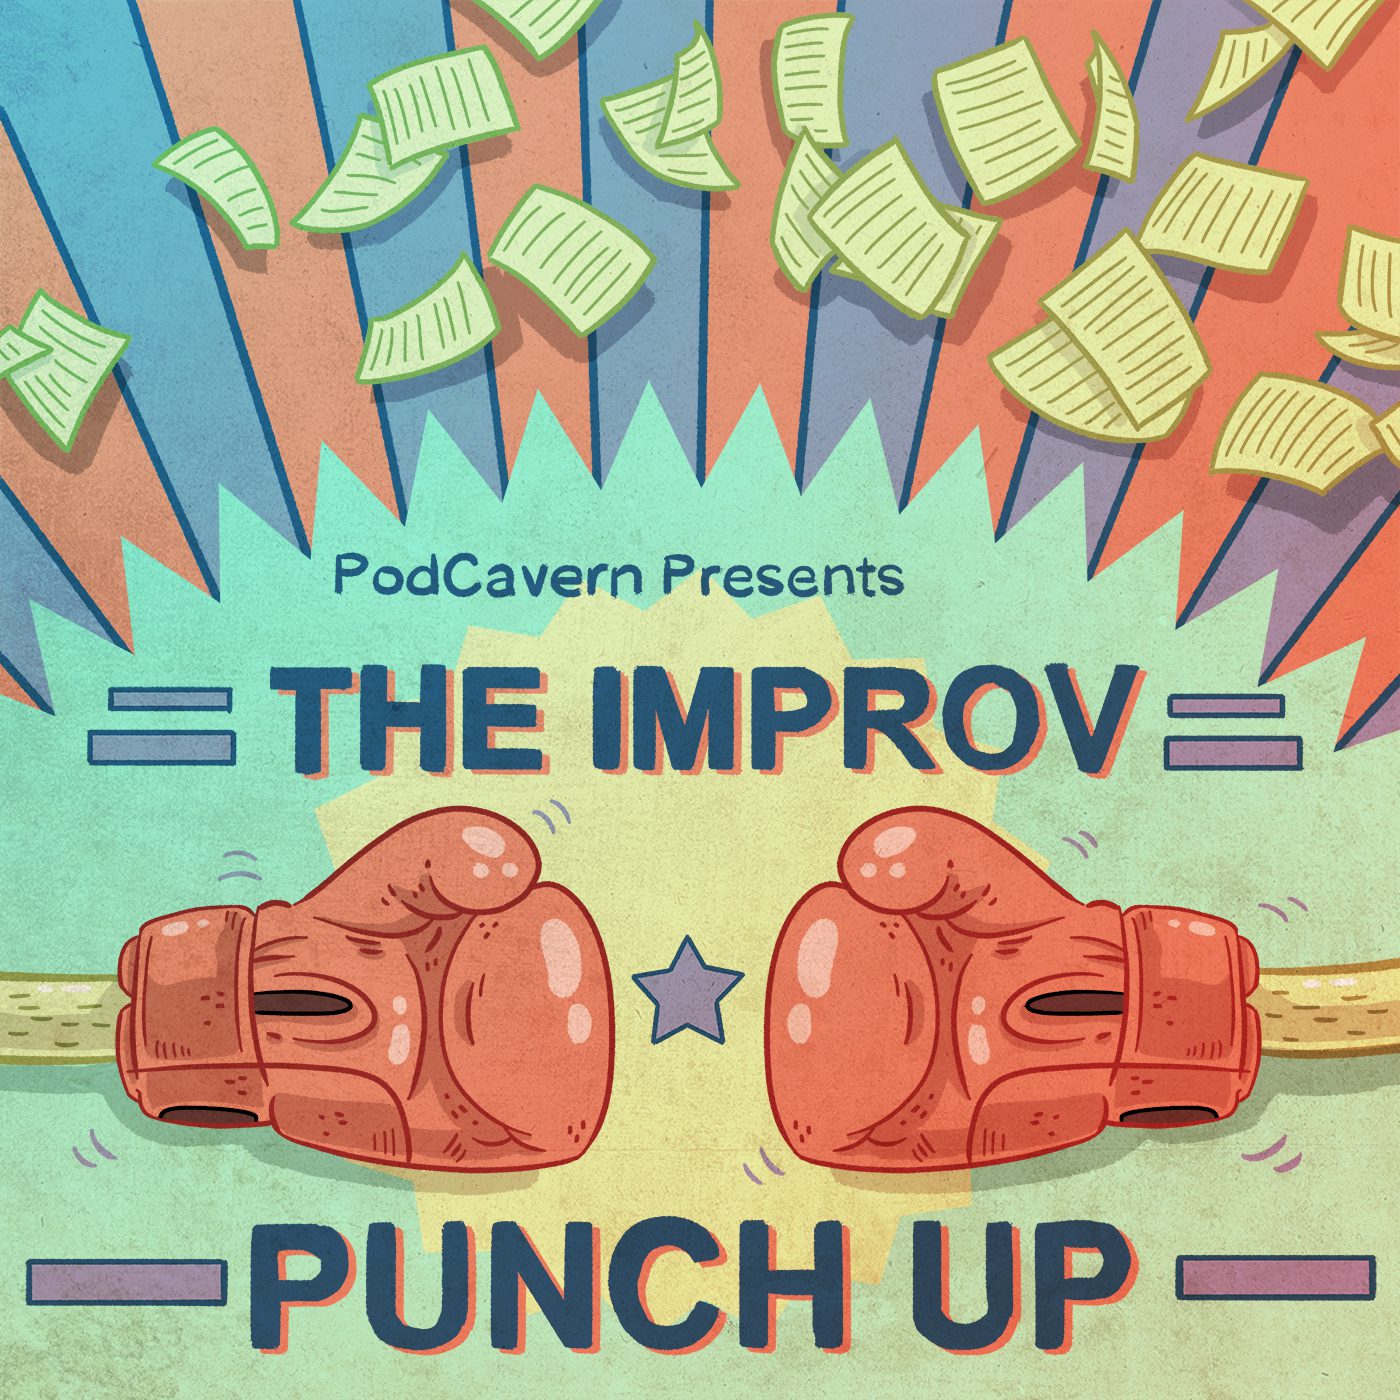 The Improv Punch Up – PodCavern